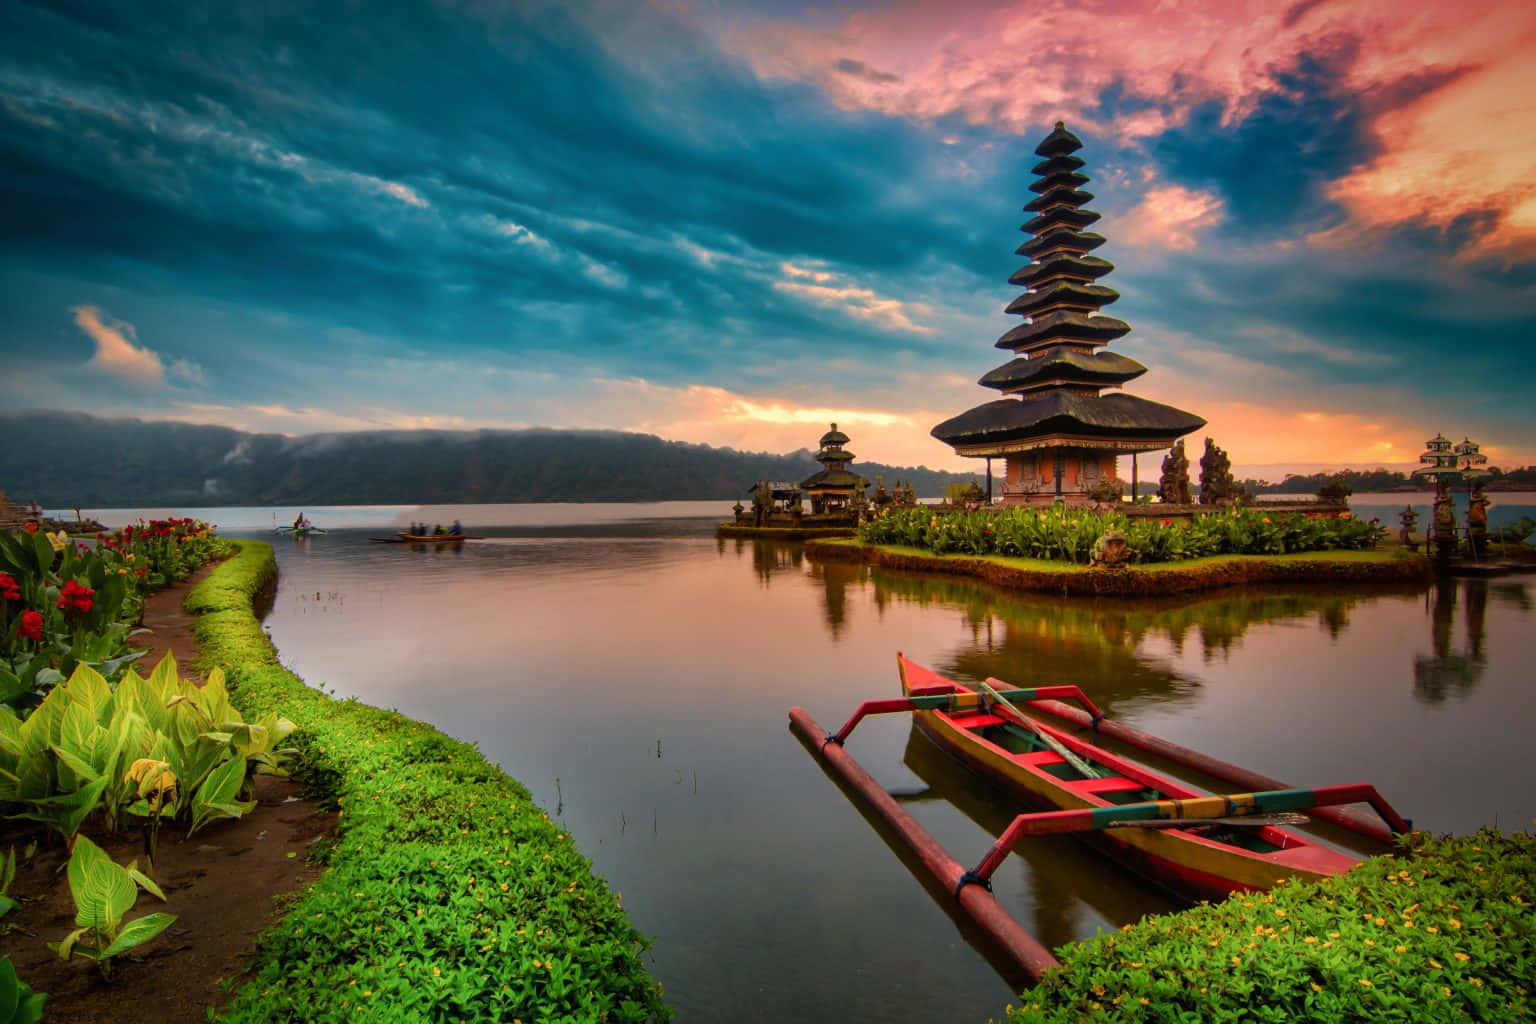 "Indulge in the Relaxing Vibes of Bali"